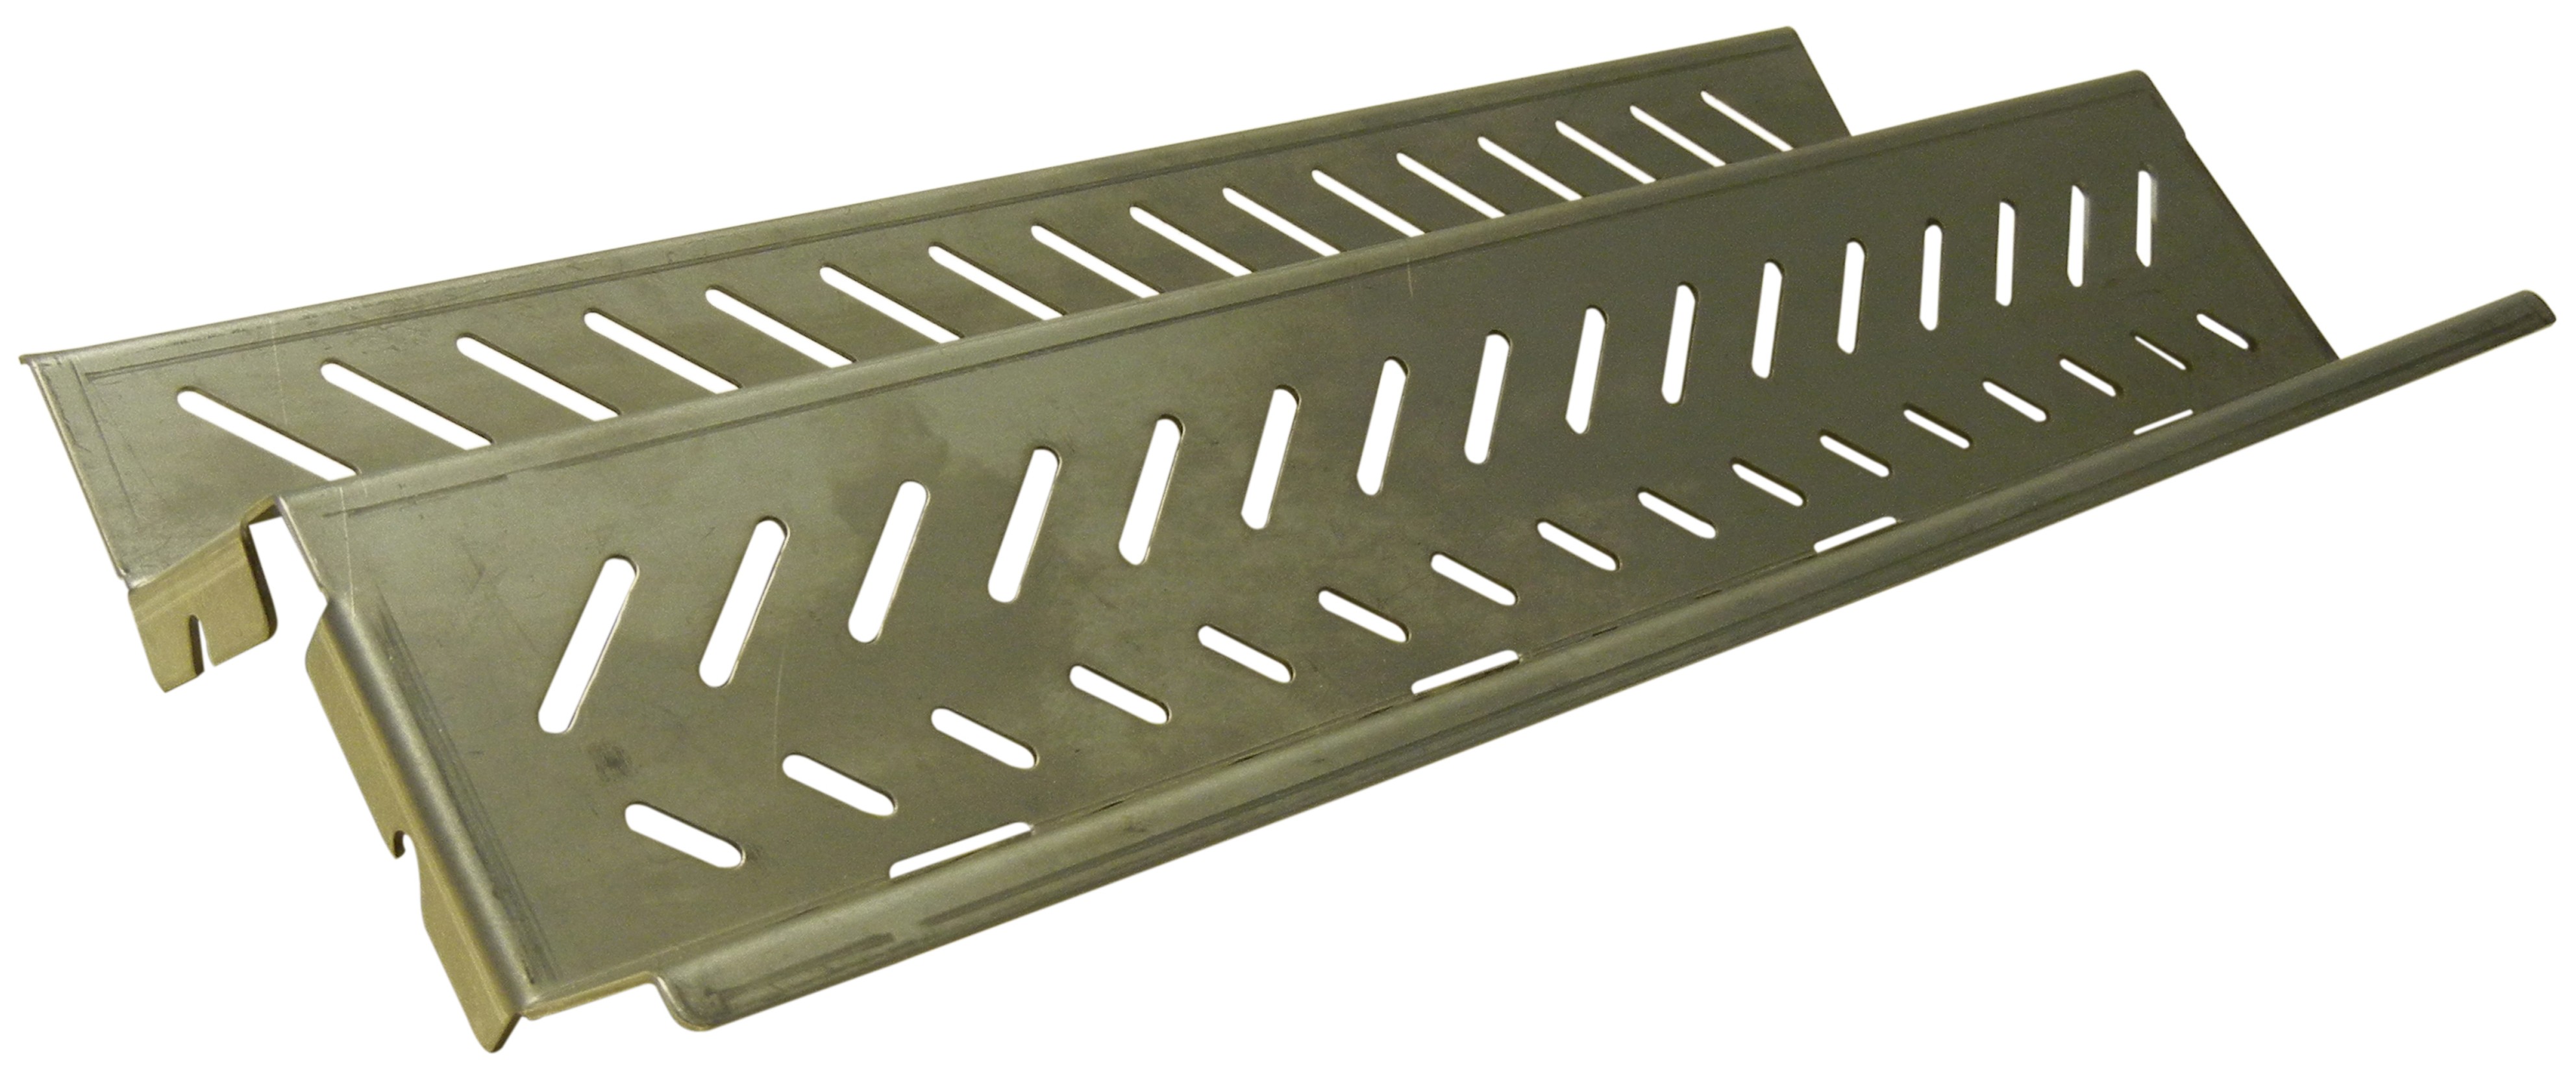 14-1/8” X 7-1/16” Stainless Steel Heat Plate